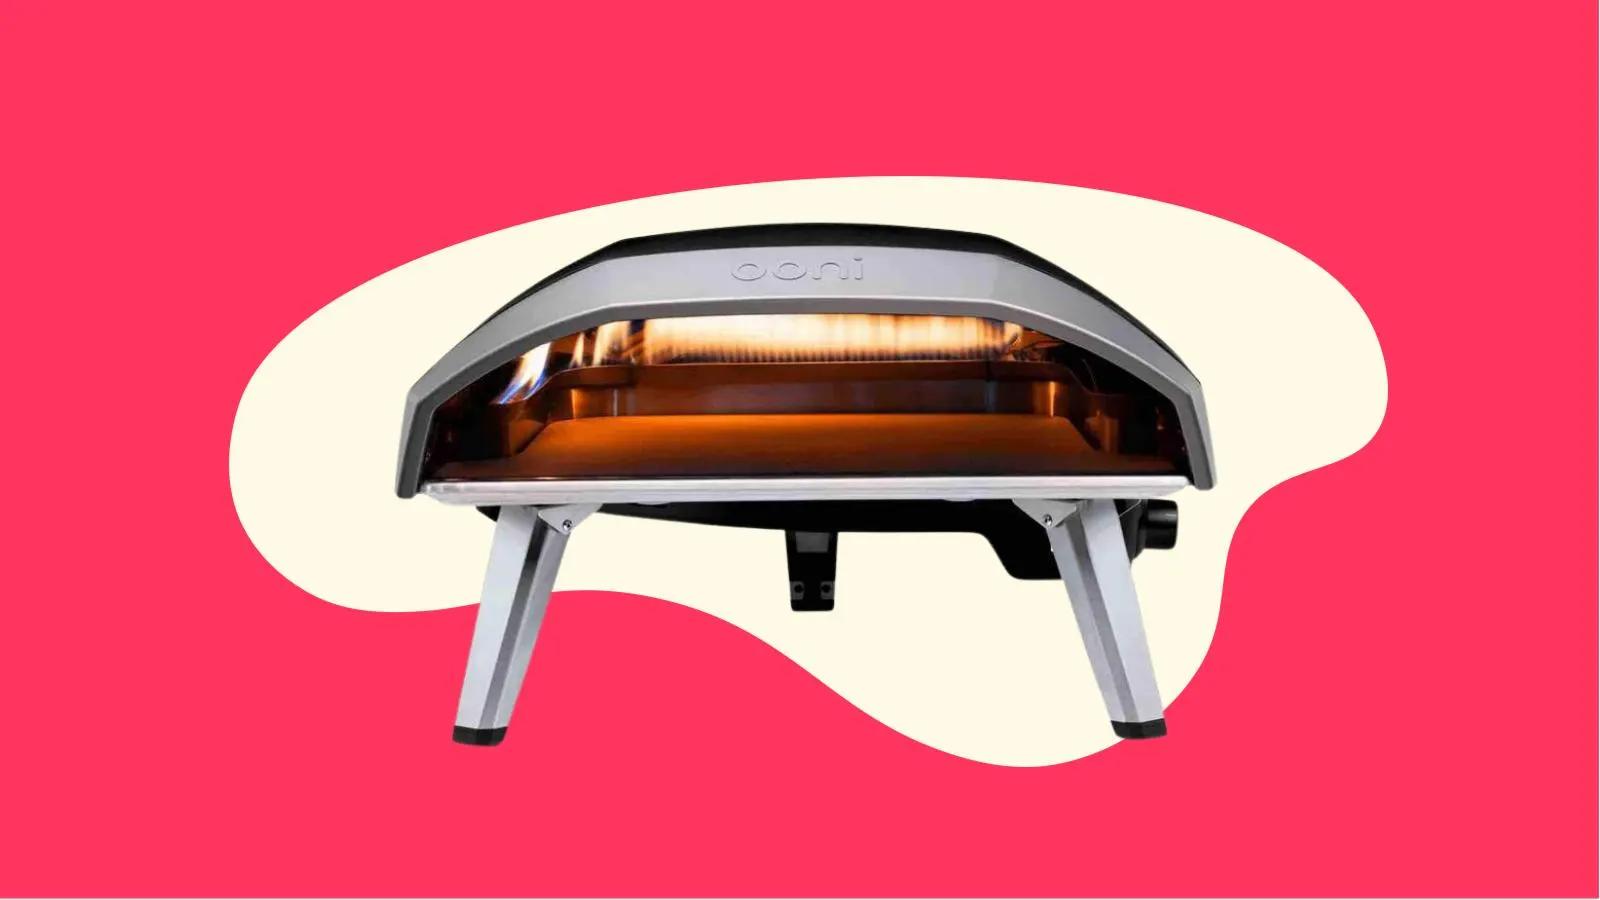 16 inch pizza oven - Is the OONI Koda 16 worth it